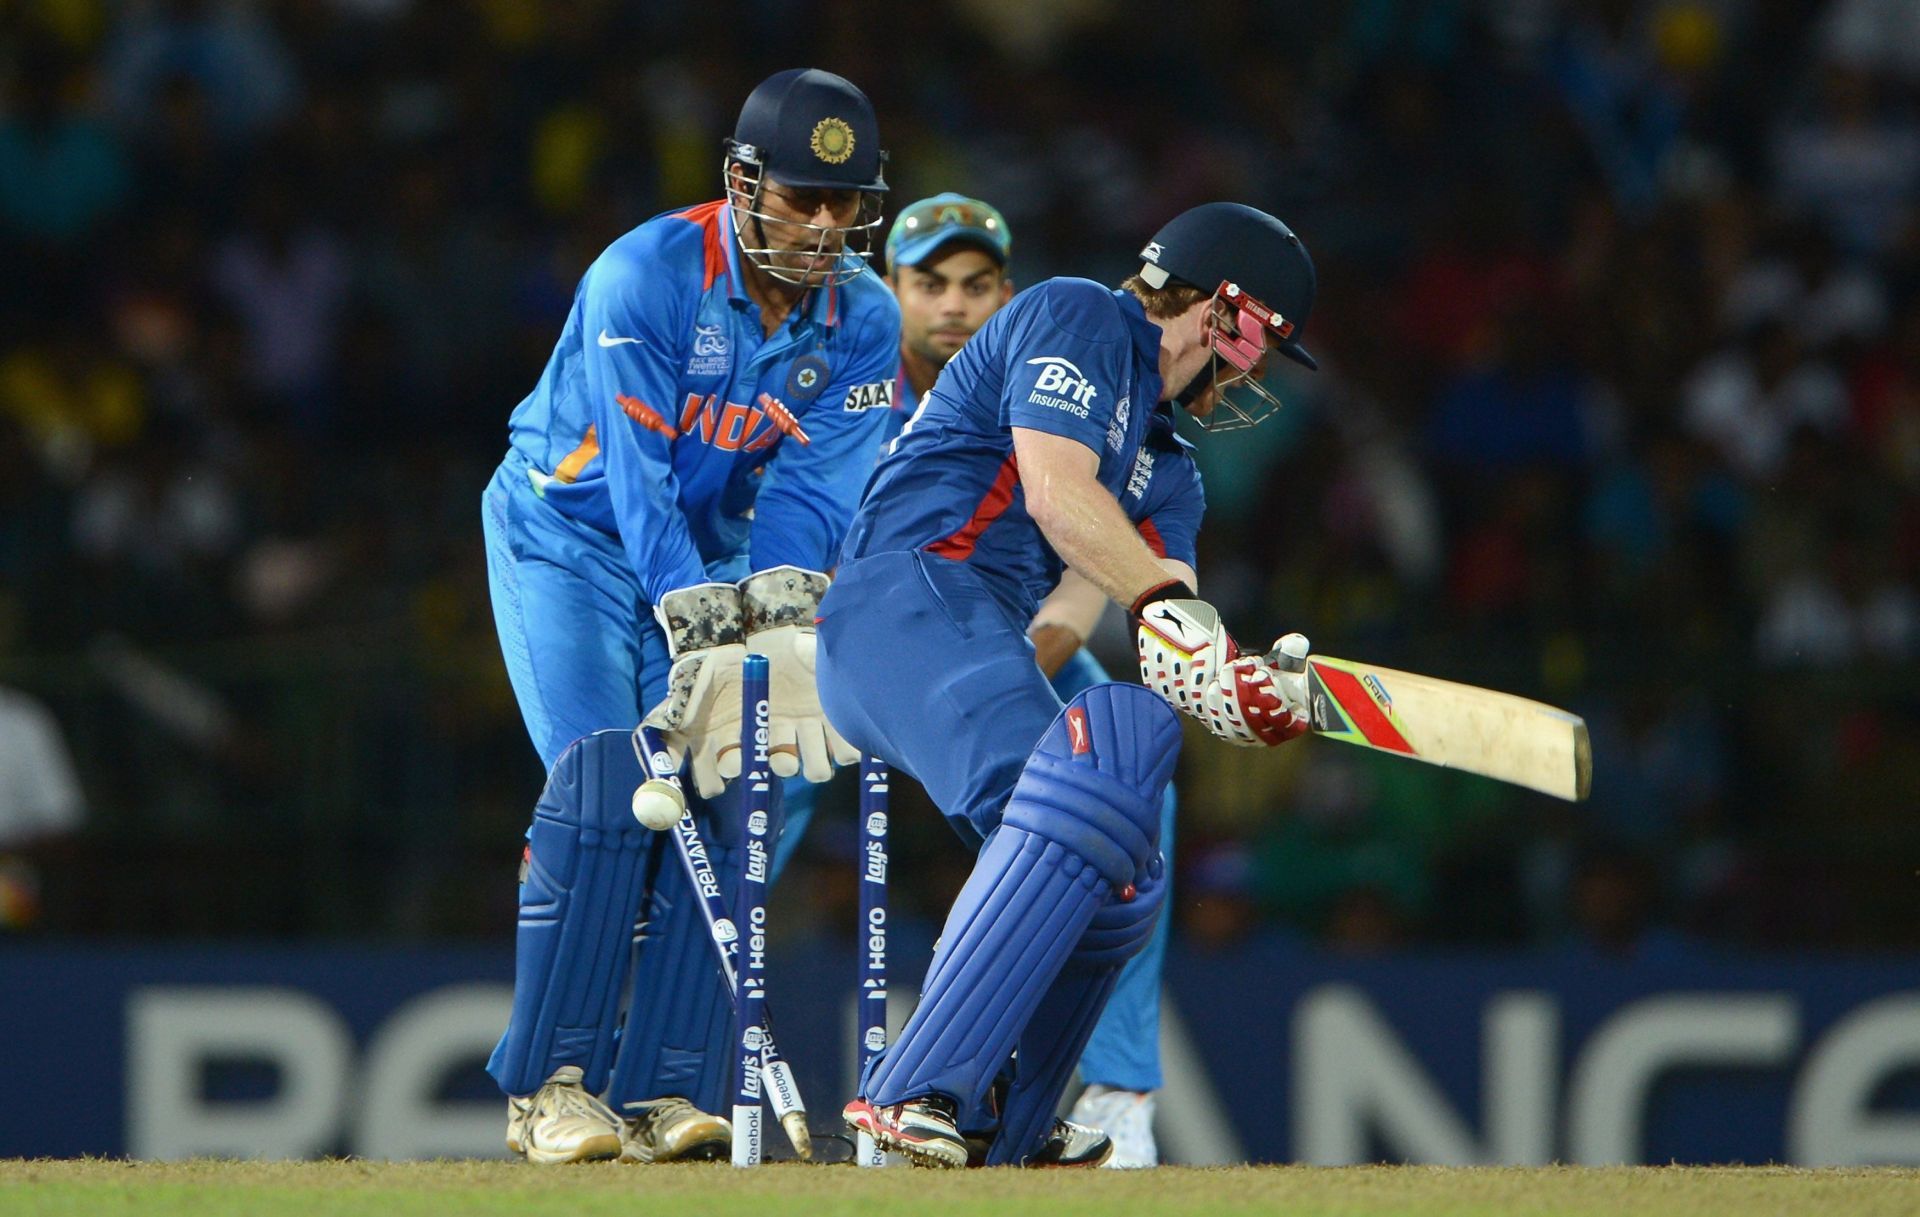 England v India - ICC T20 World Cup 2012: Group A (Image: Getty)